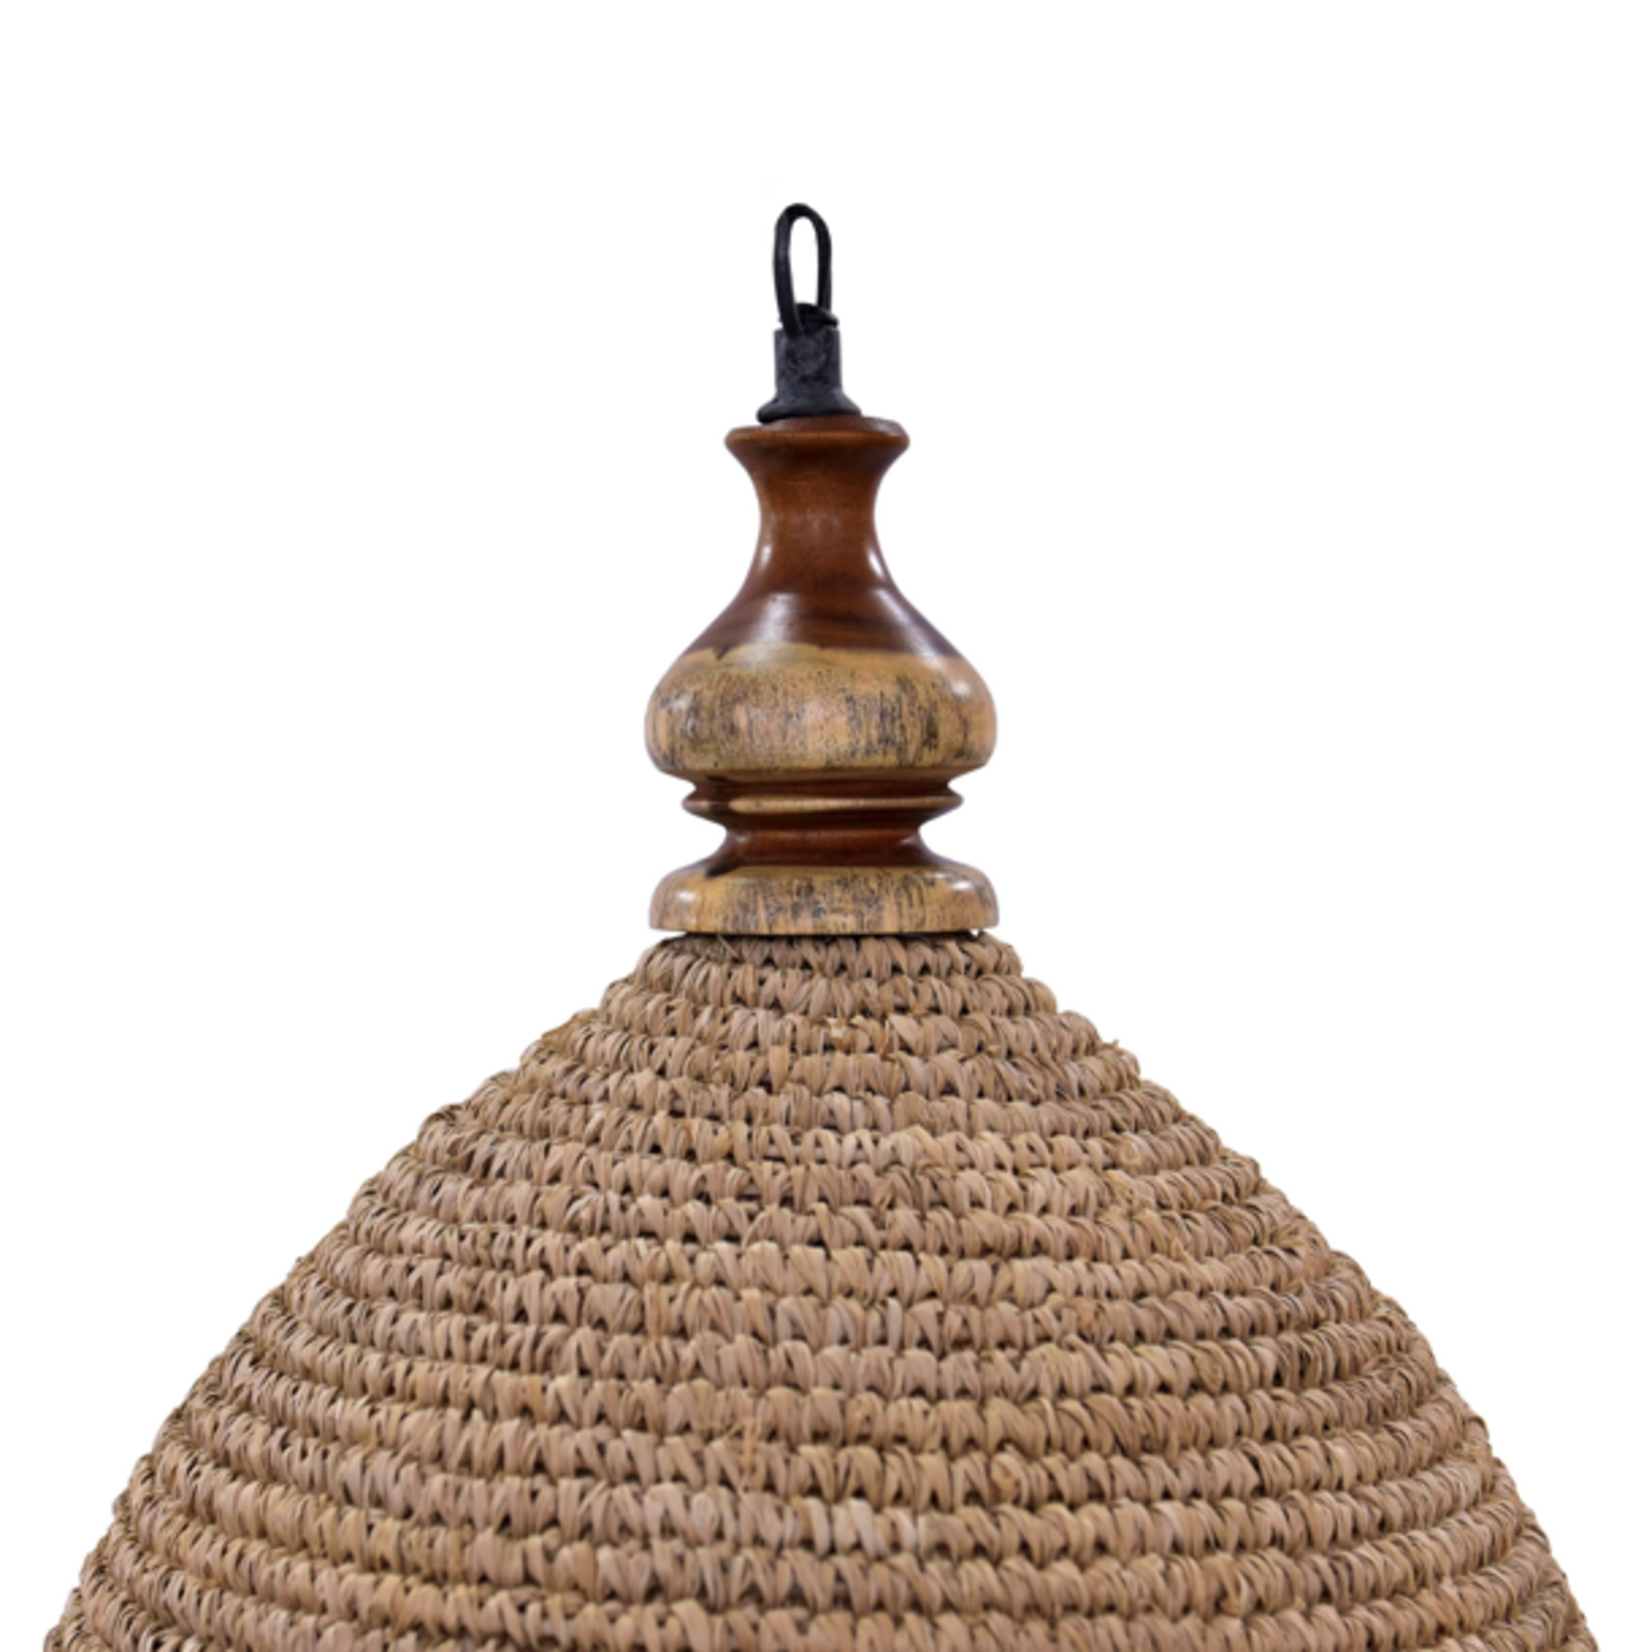 Outside The Box 27" Verdon Knitted Pendant In Natural